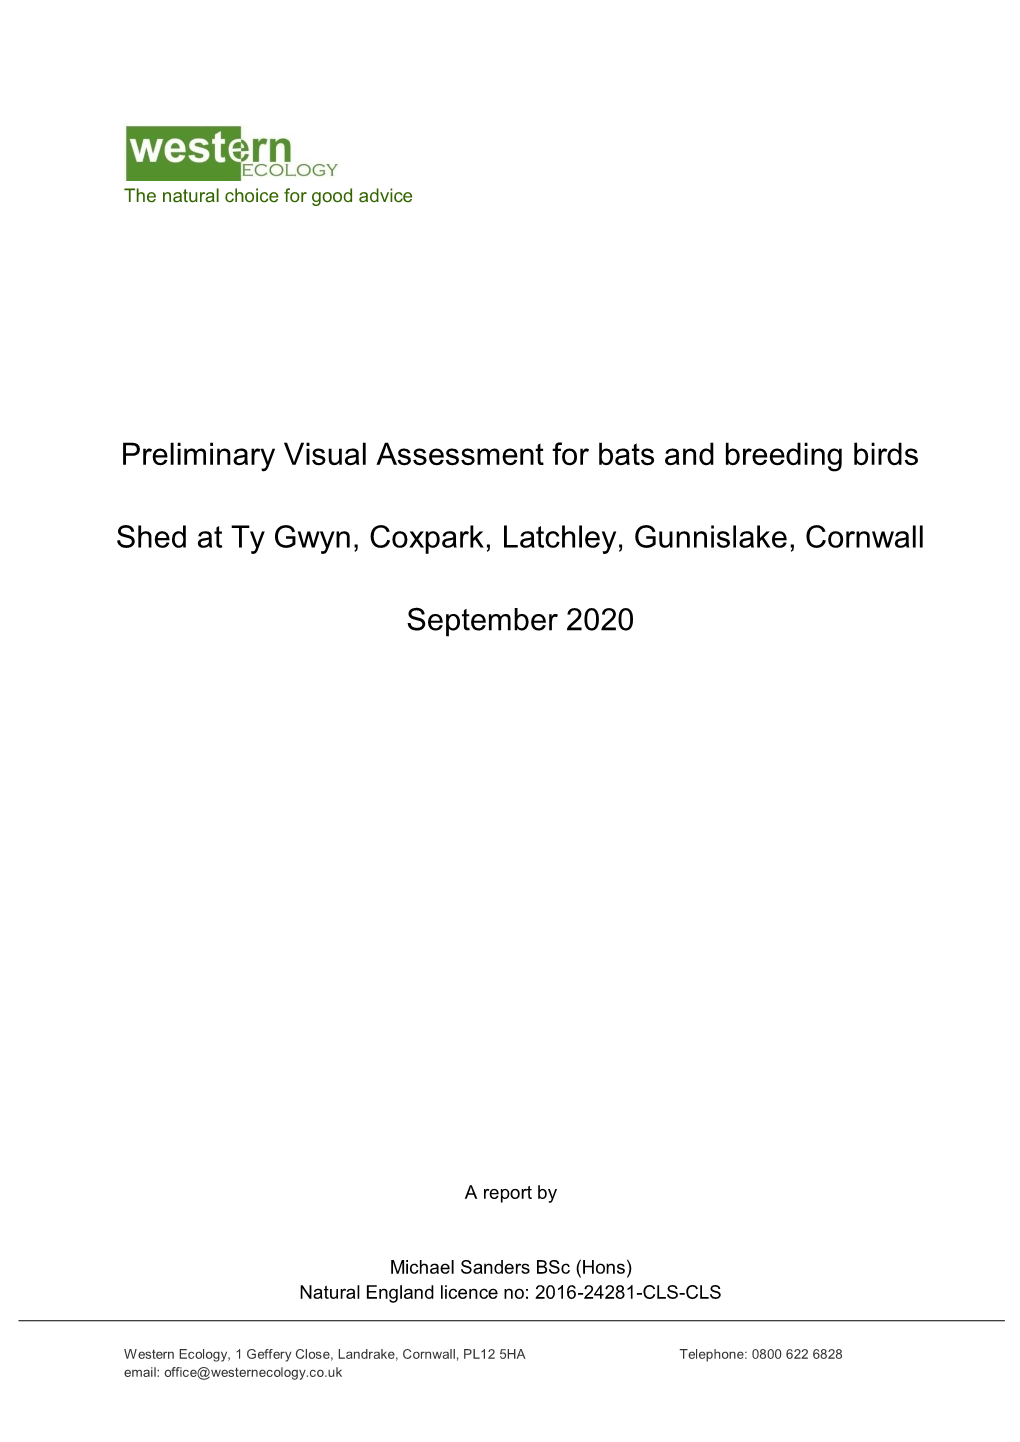 Preliminary Visual Assessment for Bats and Breeding Birds Shed At